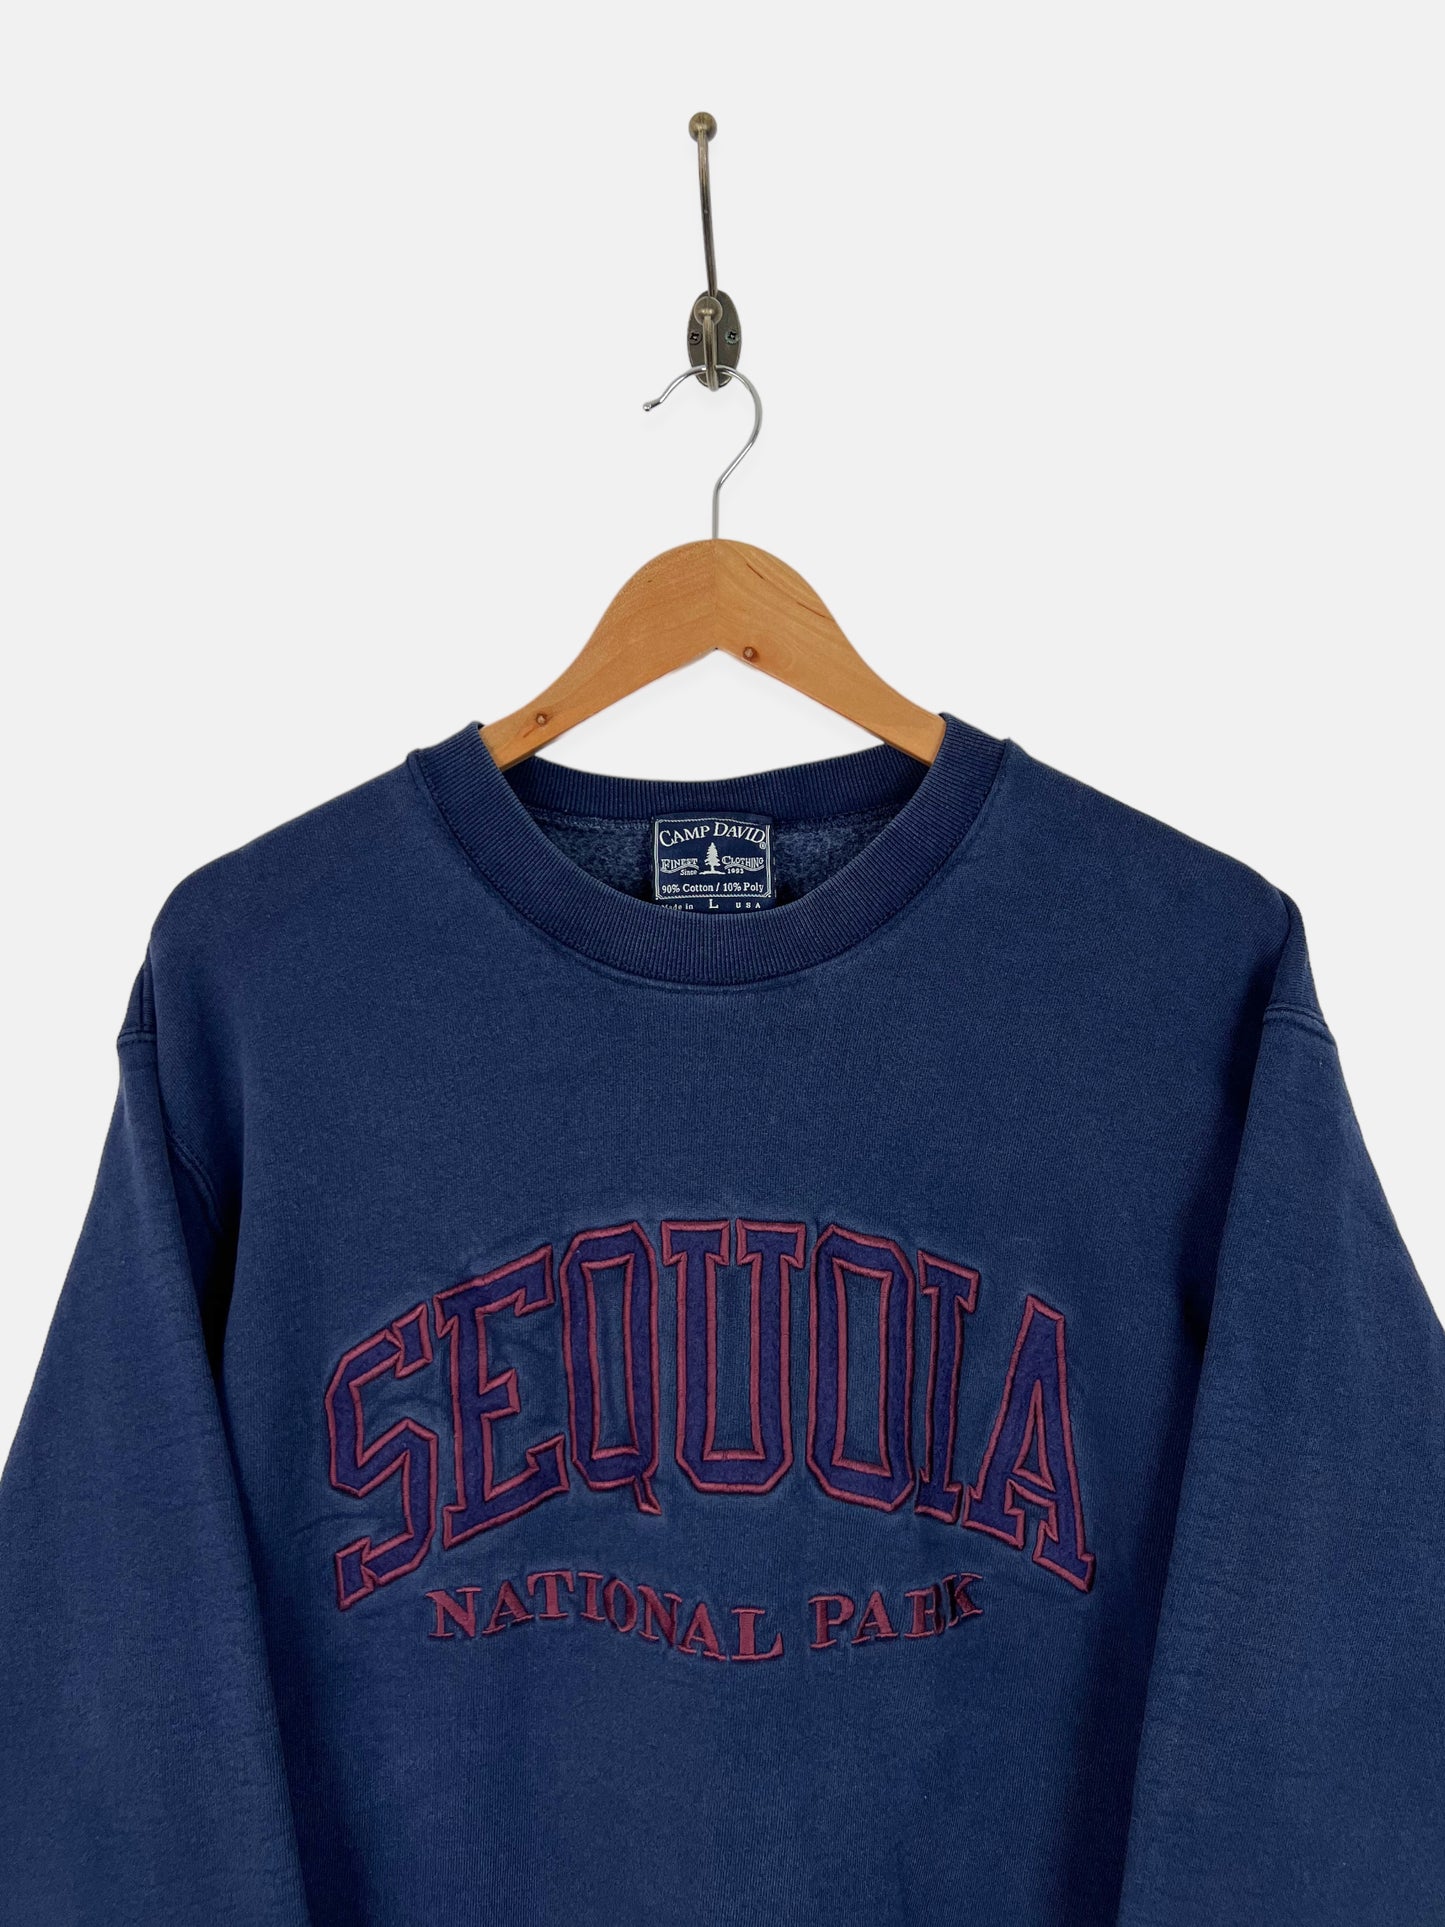 90's Sequoia National Park USA Made Embroidered Vintage Sweatshirt Size 10-12